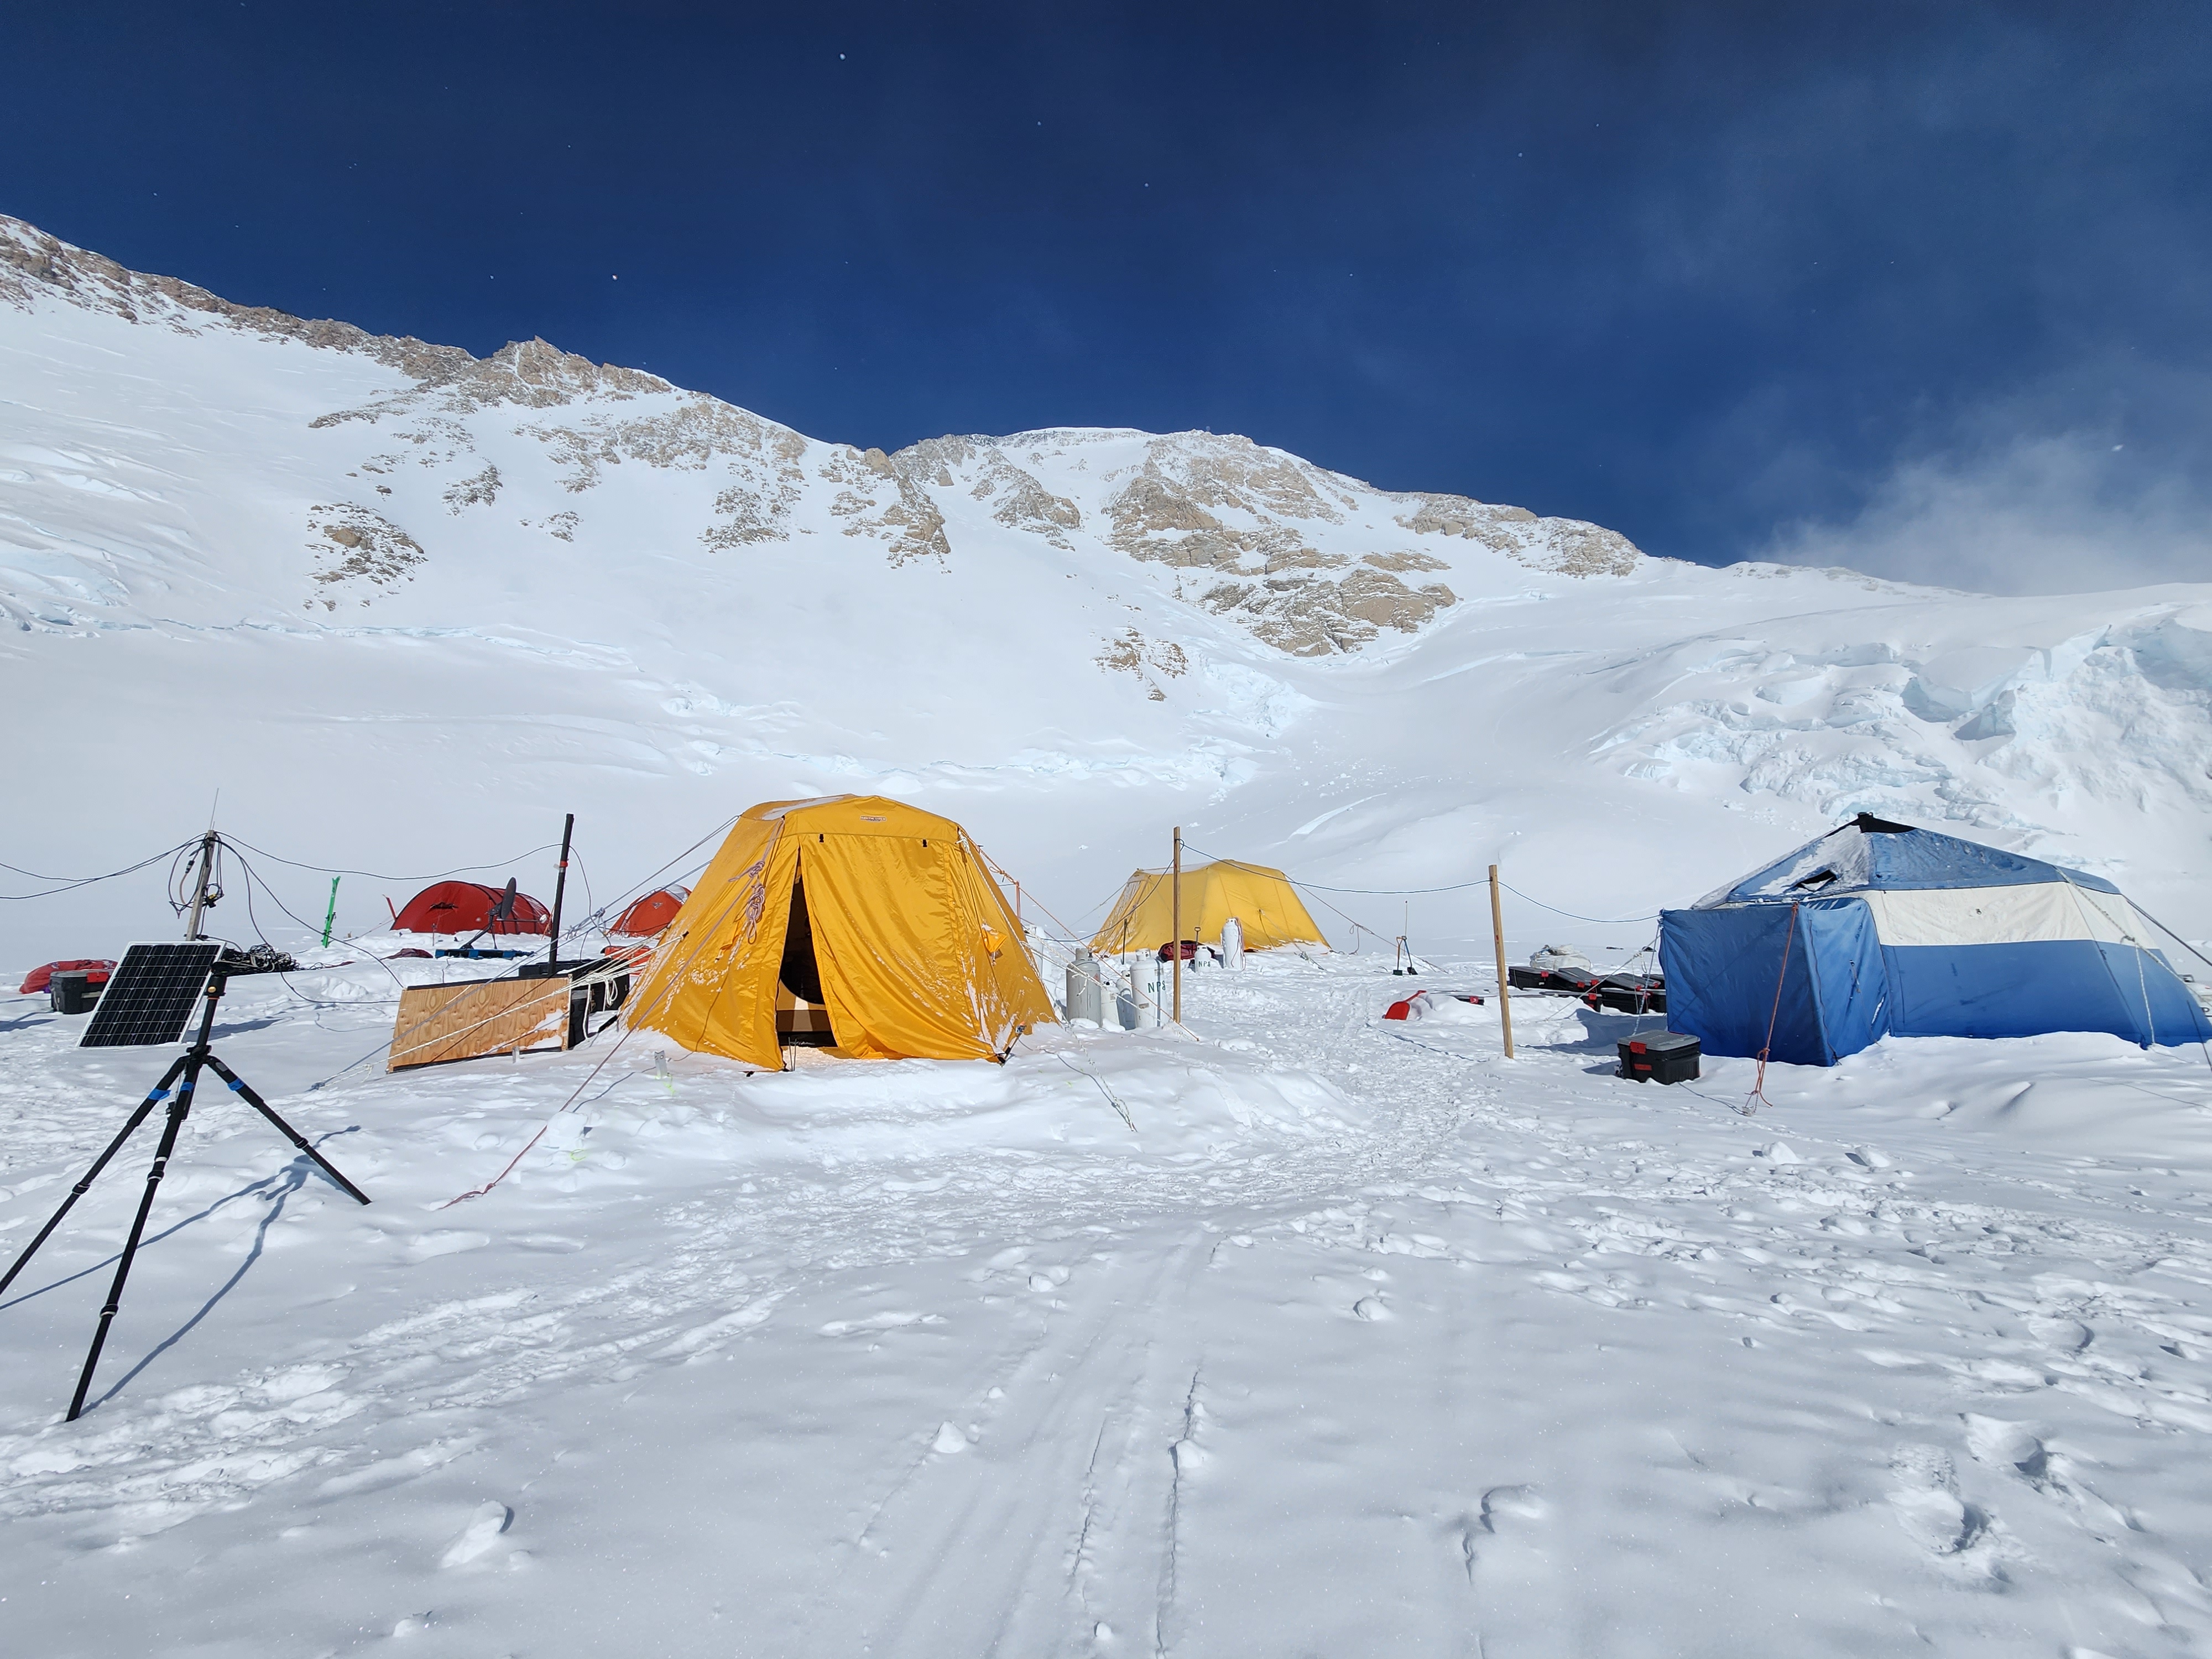 Glacier occupied by five large camp tents, several of which are connected to a solar panel with electrical wires.